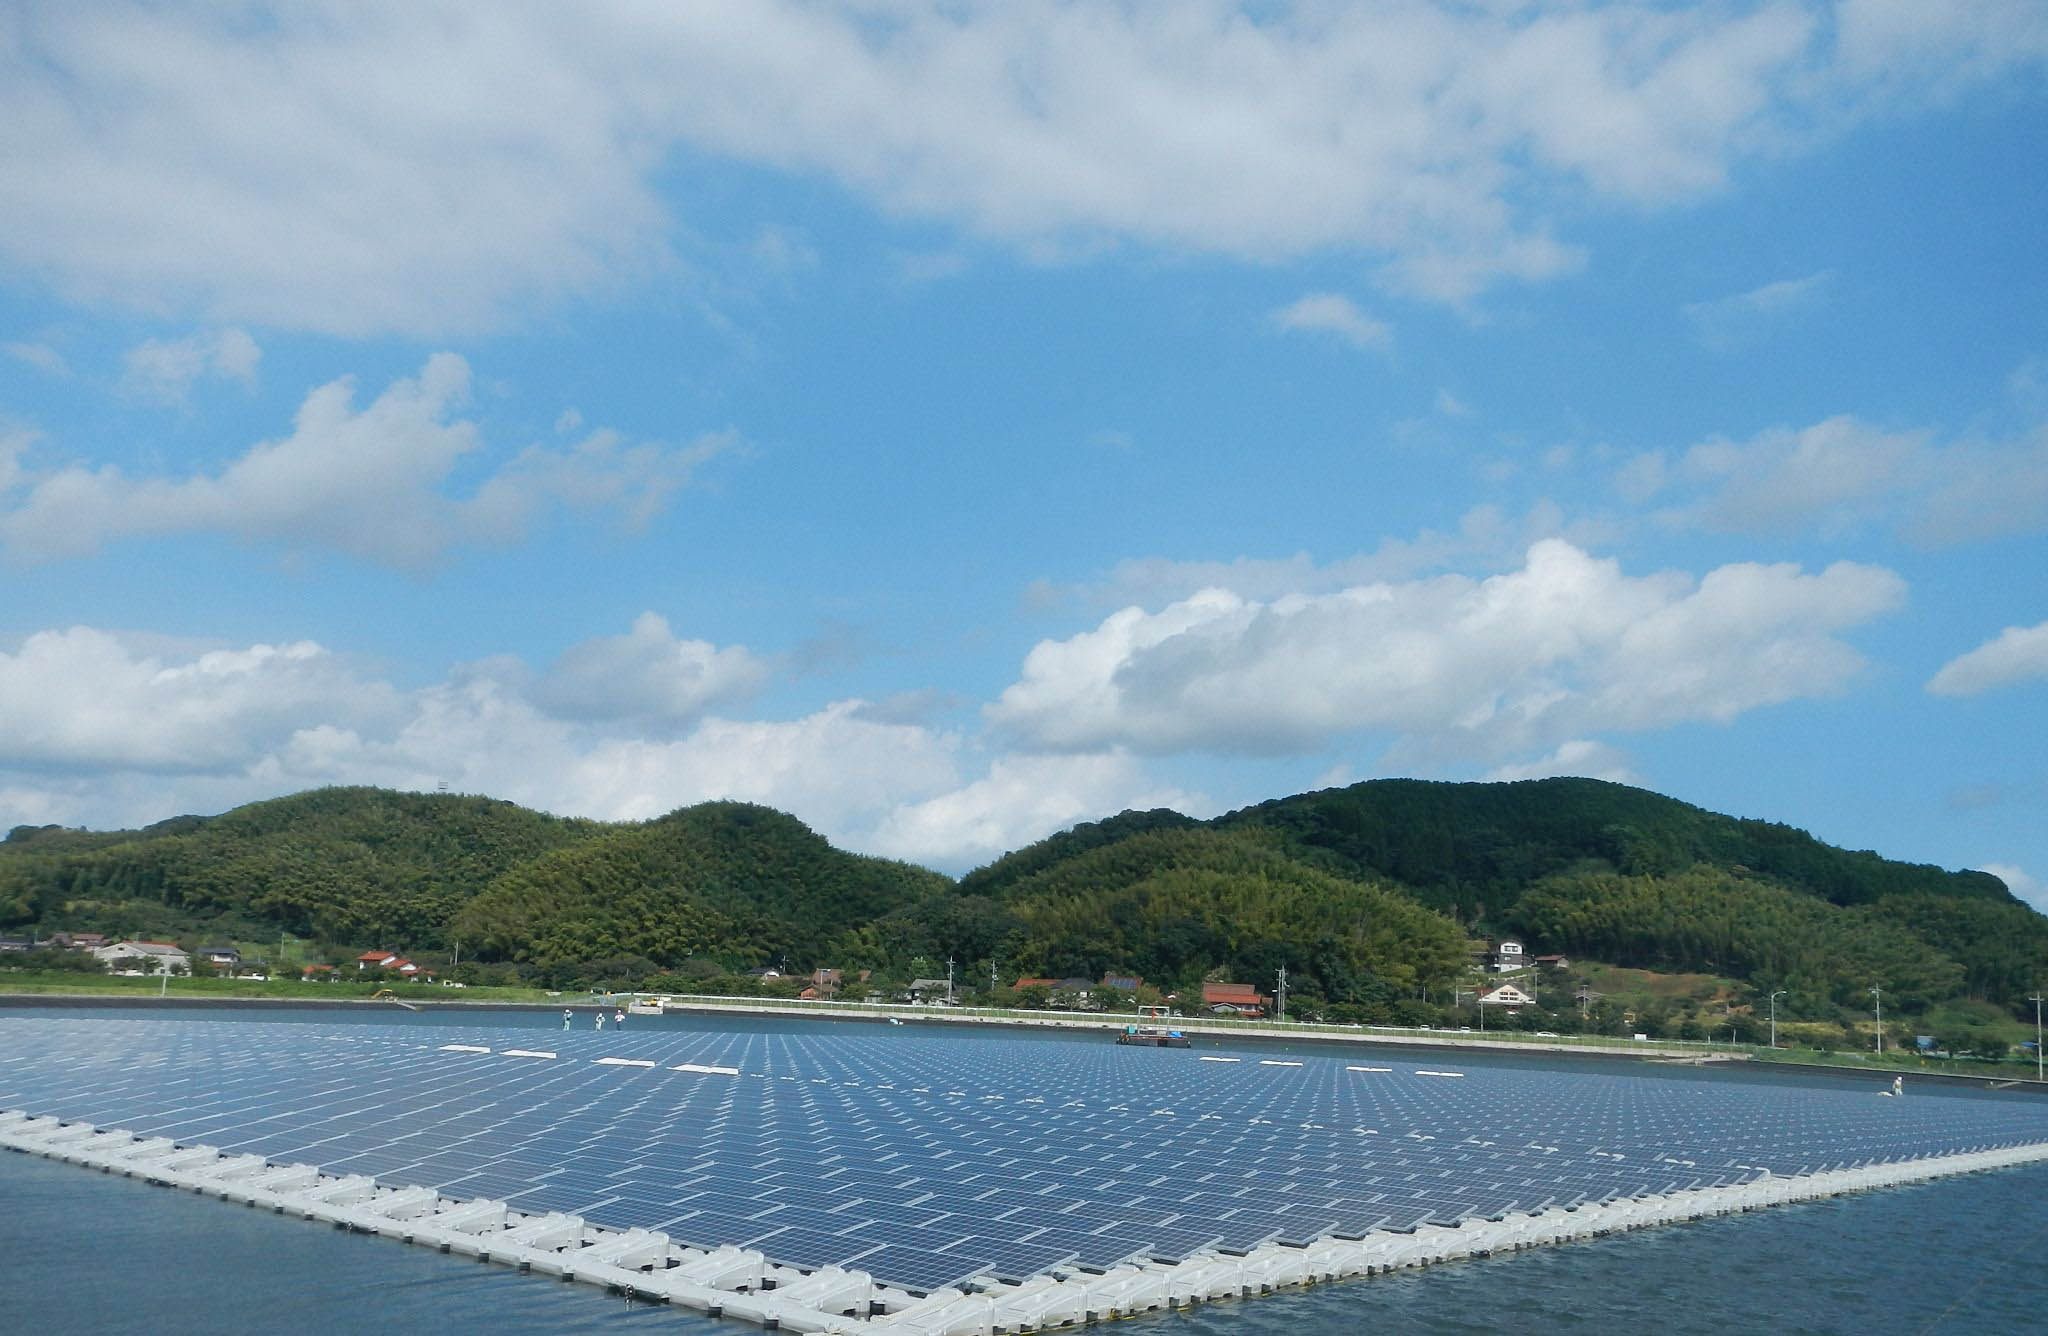 Solar Panels Floating on Water Will Power Japan's Homes